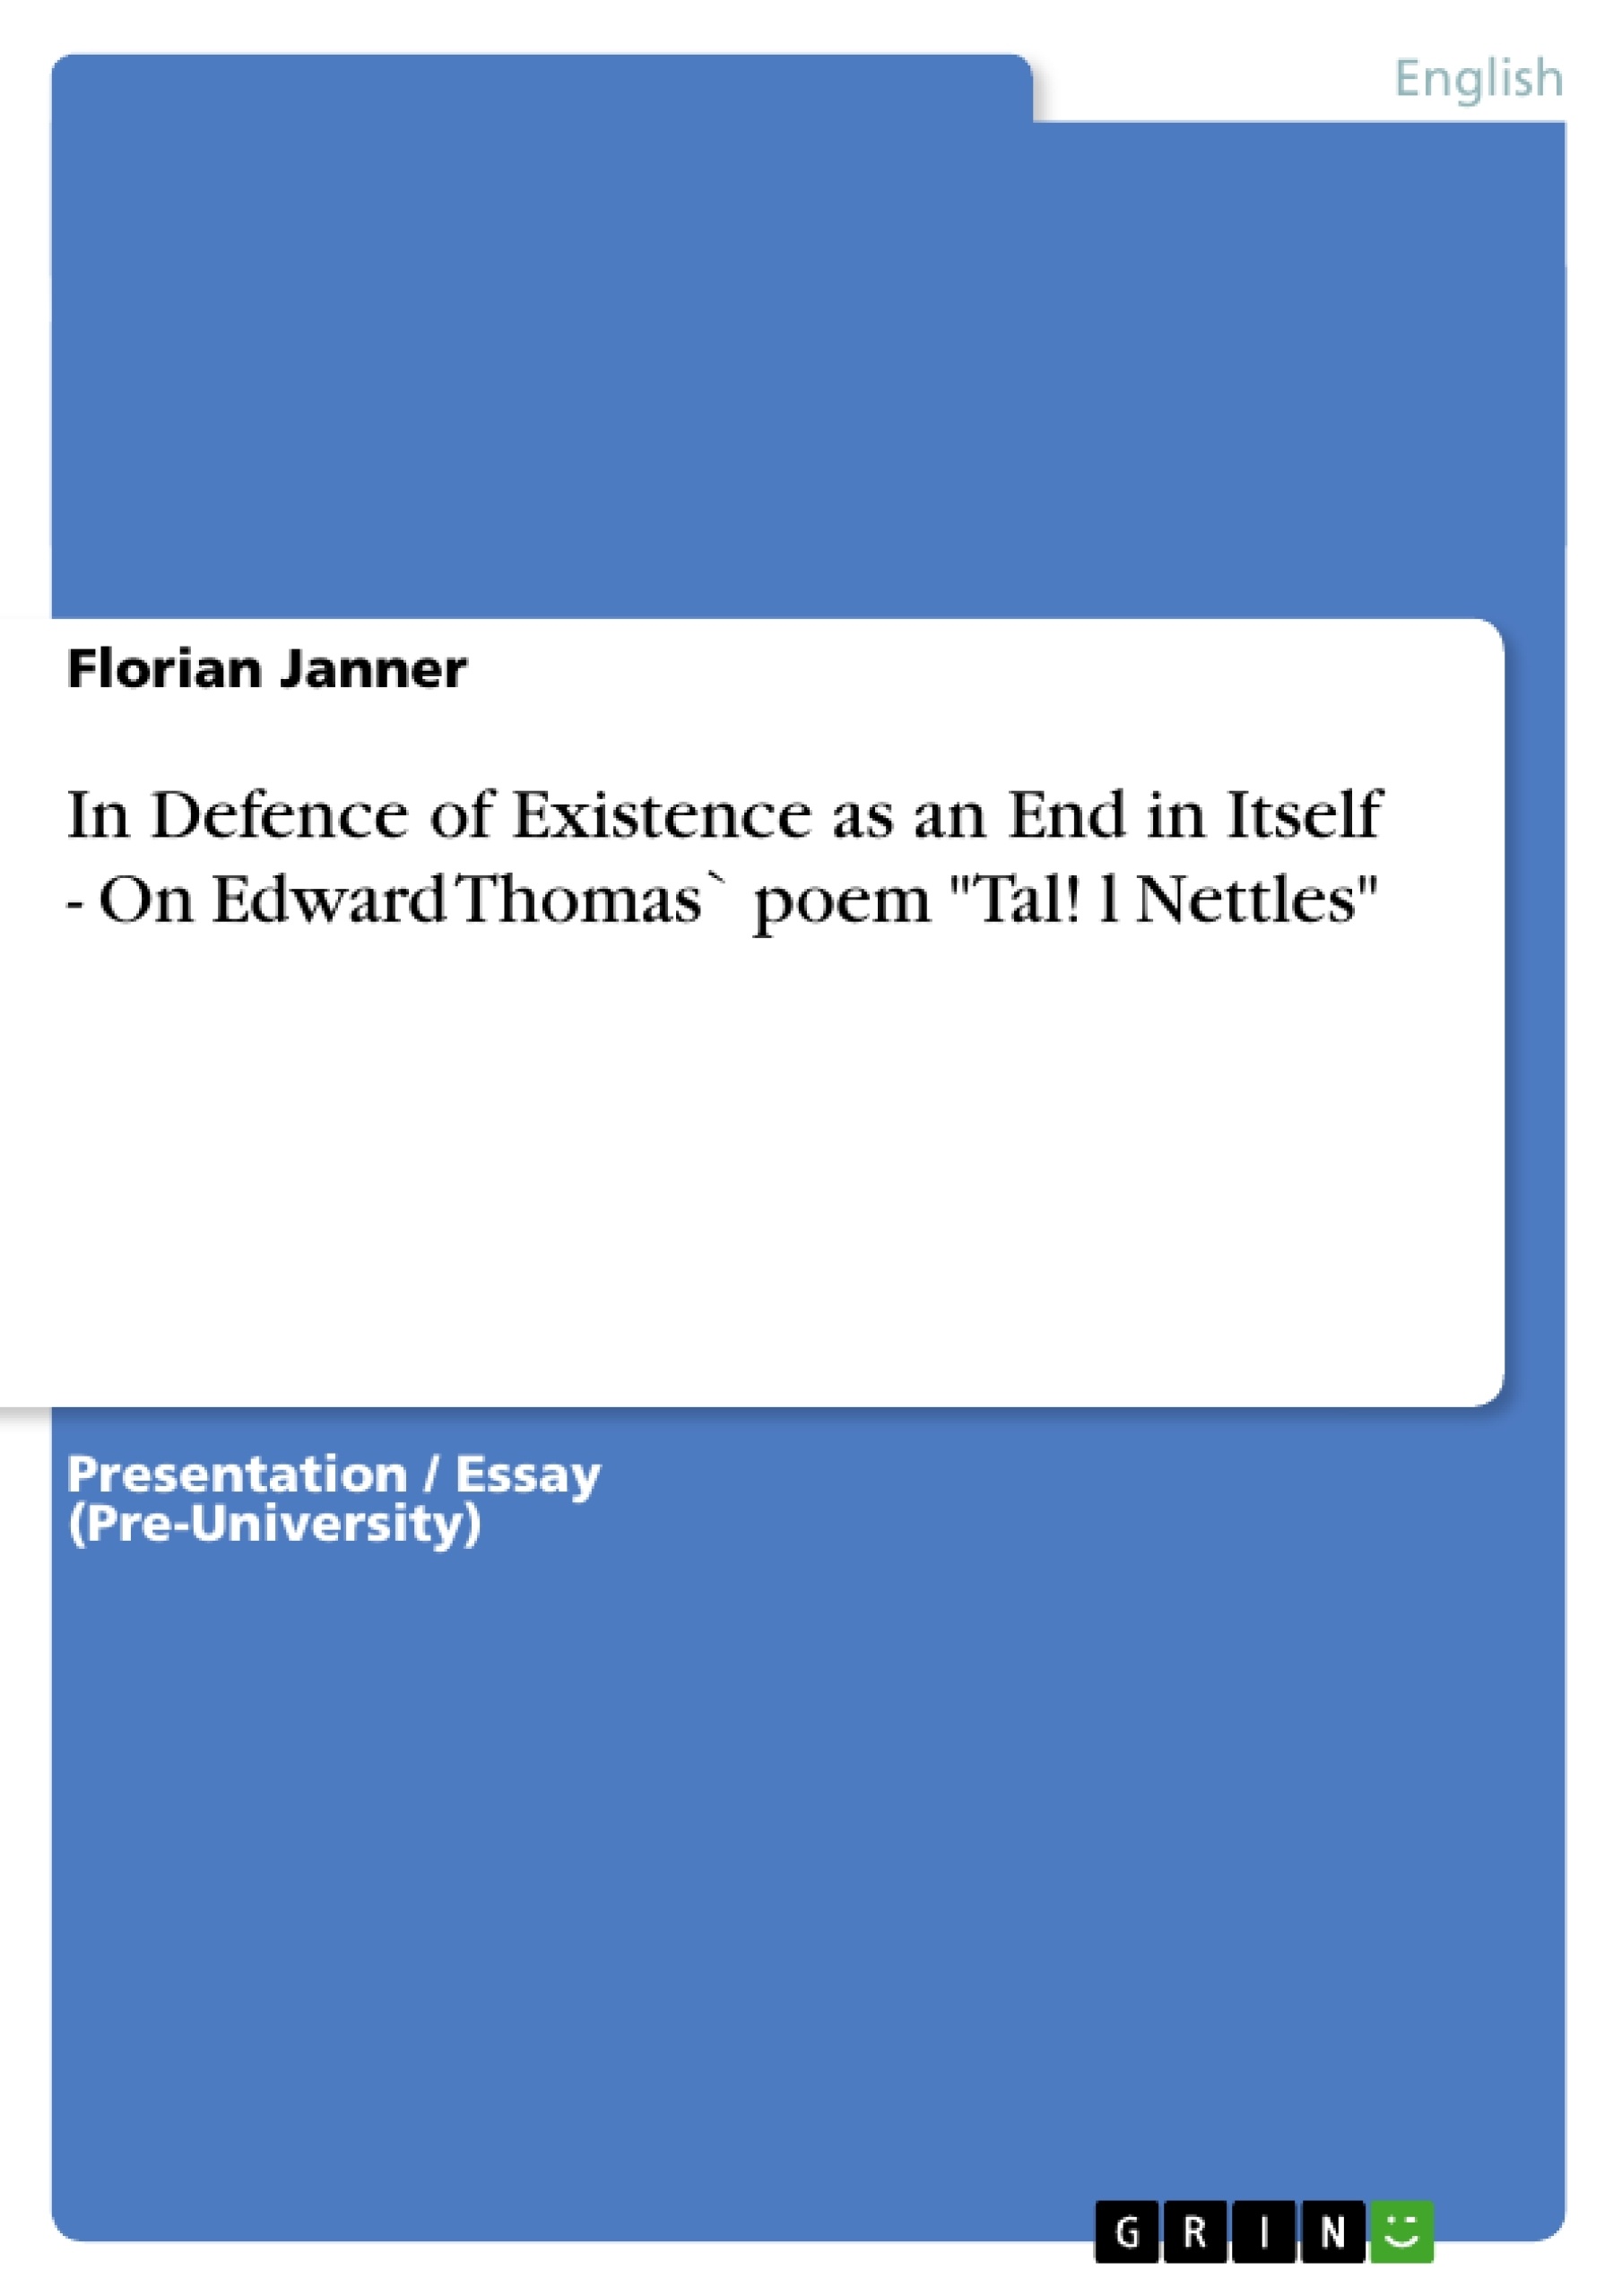 Title: In Defence of Existence as an End in Itself - On Edward Thomas` poem "Tal! l Nettles"